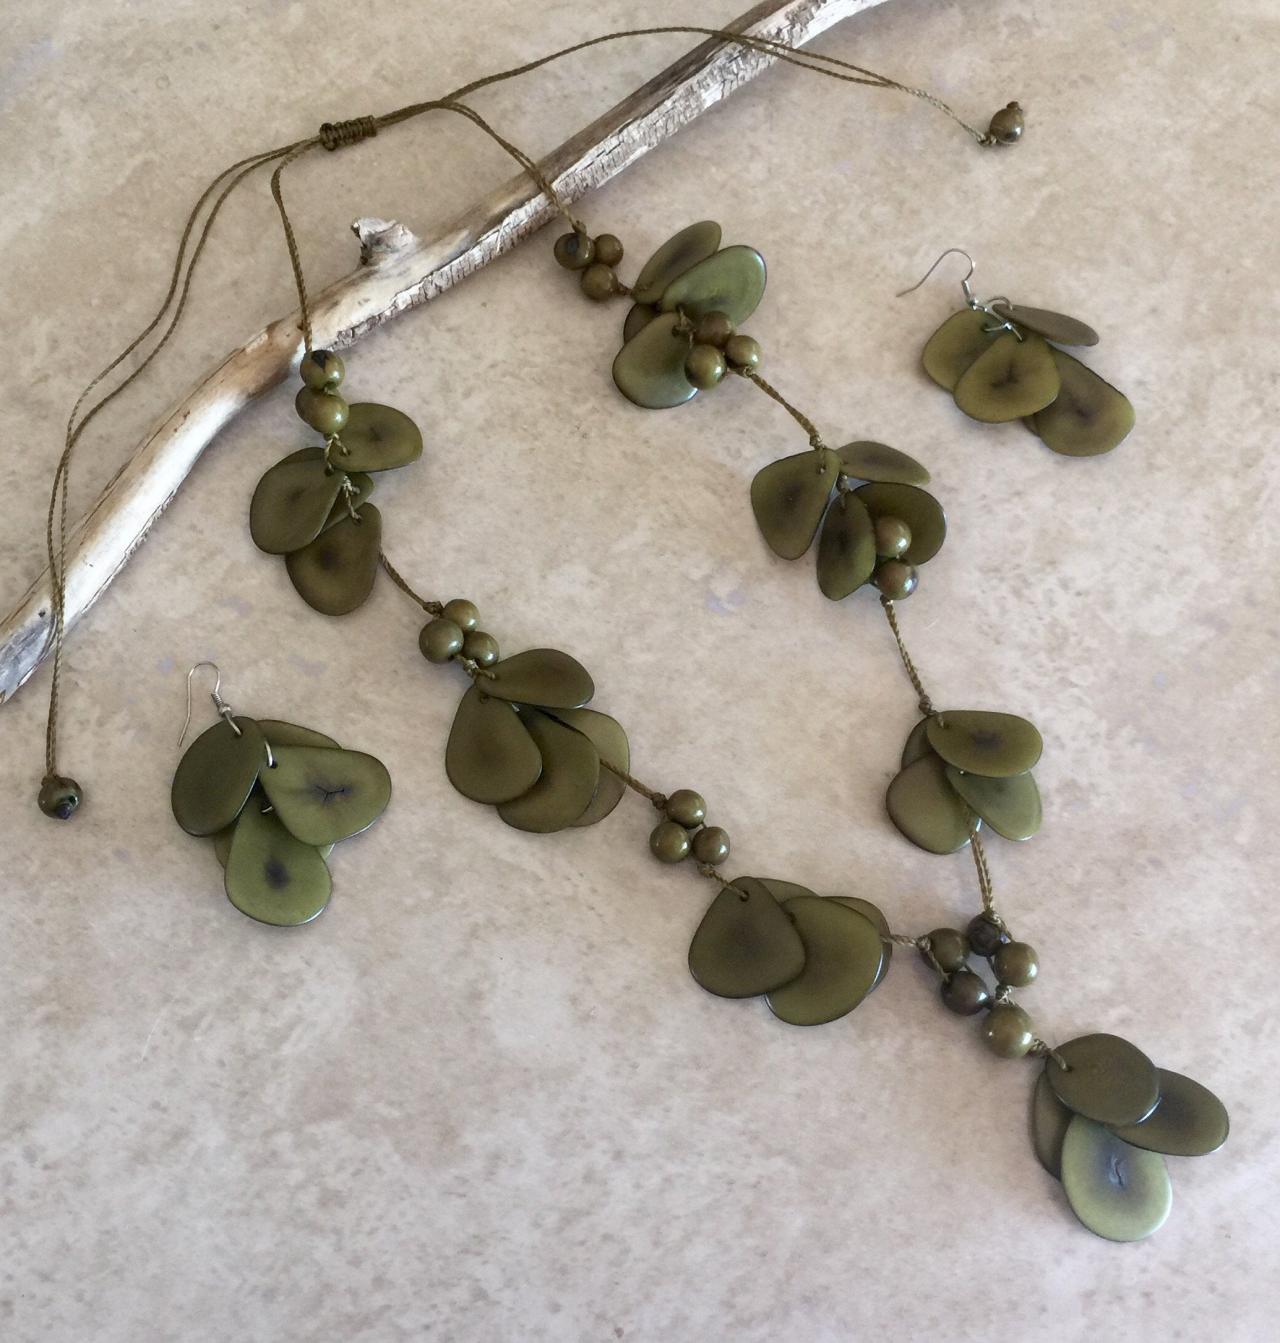 Olive Green Necklace and Earrings, Handmade Necklace, Long Necklace, Ecofriendly Necklace, Statement Necklace, Seeds Necklace, Summer